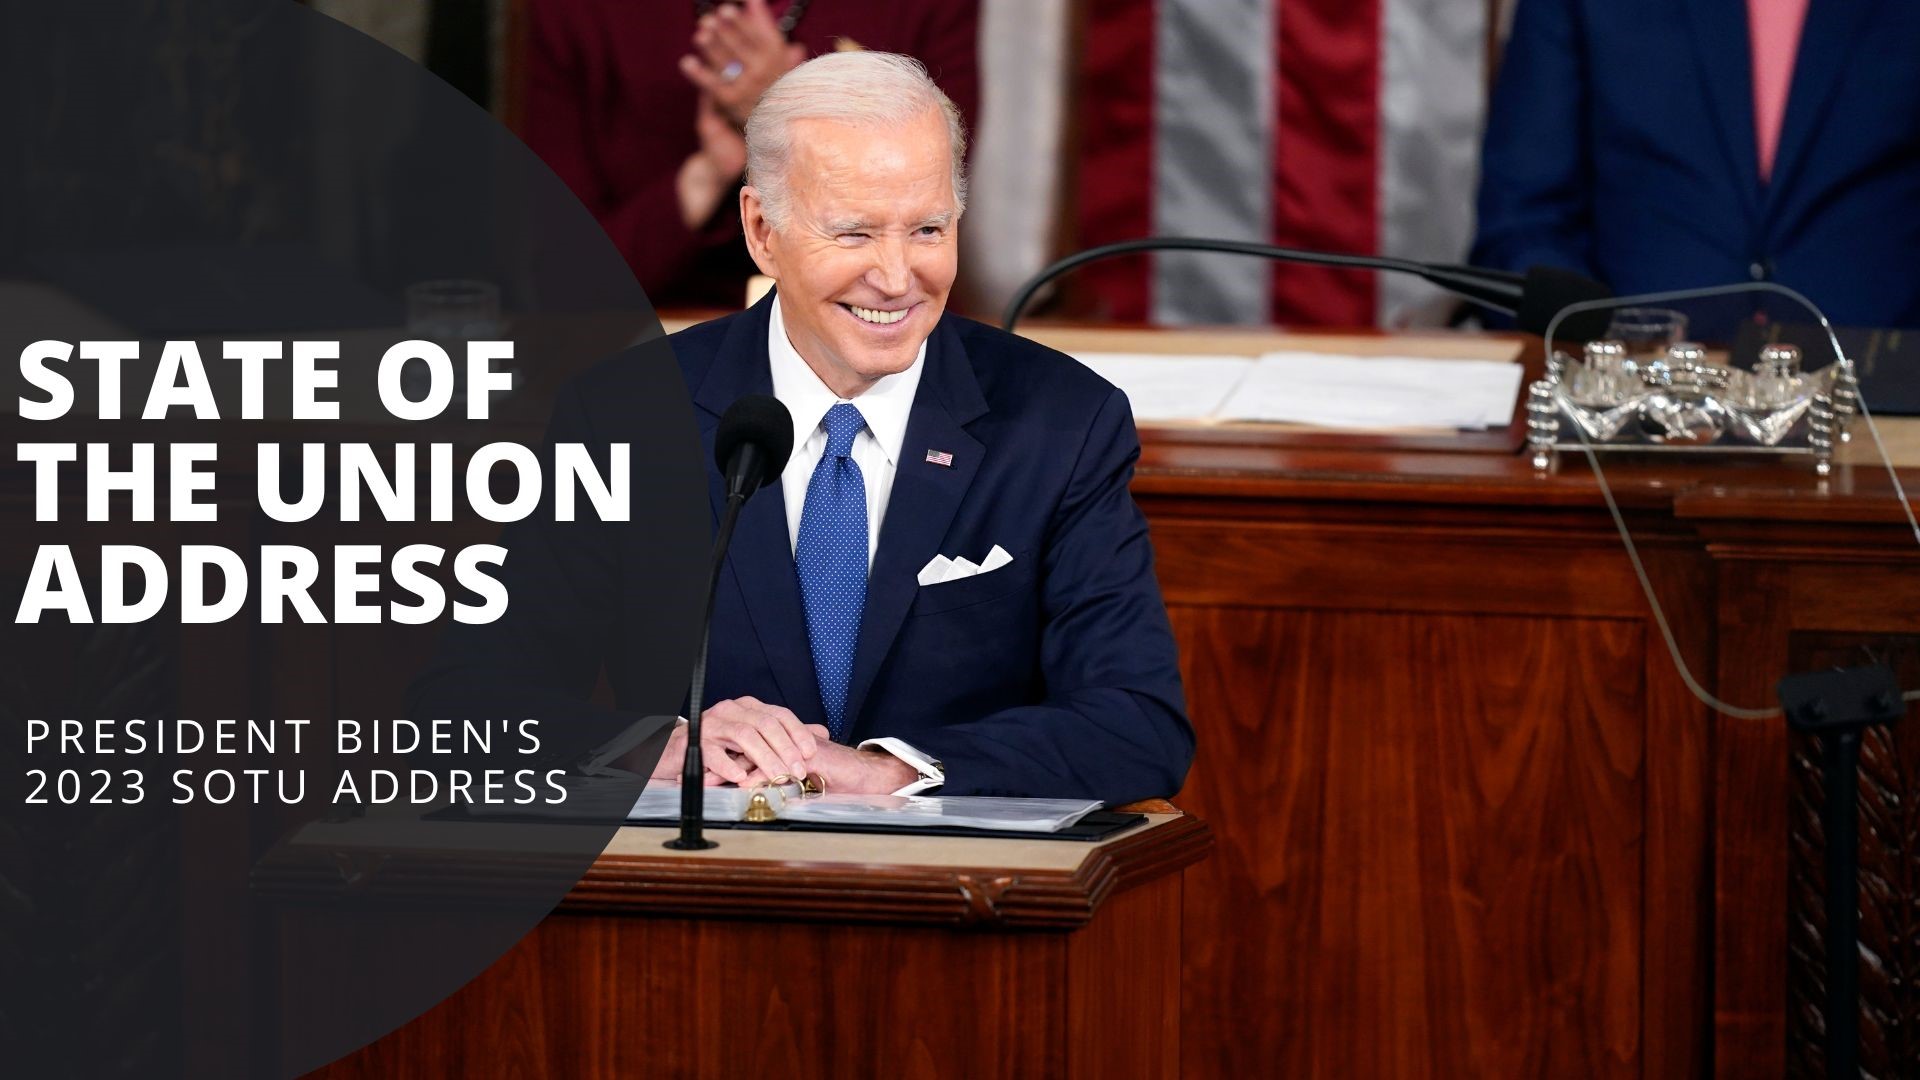 President Biden gives his second State of the Union speech focusing on the economy, police reform and more.